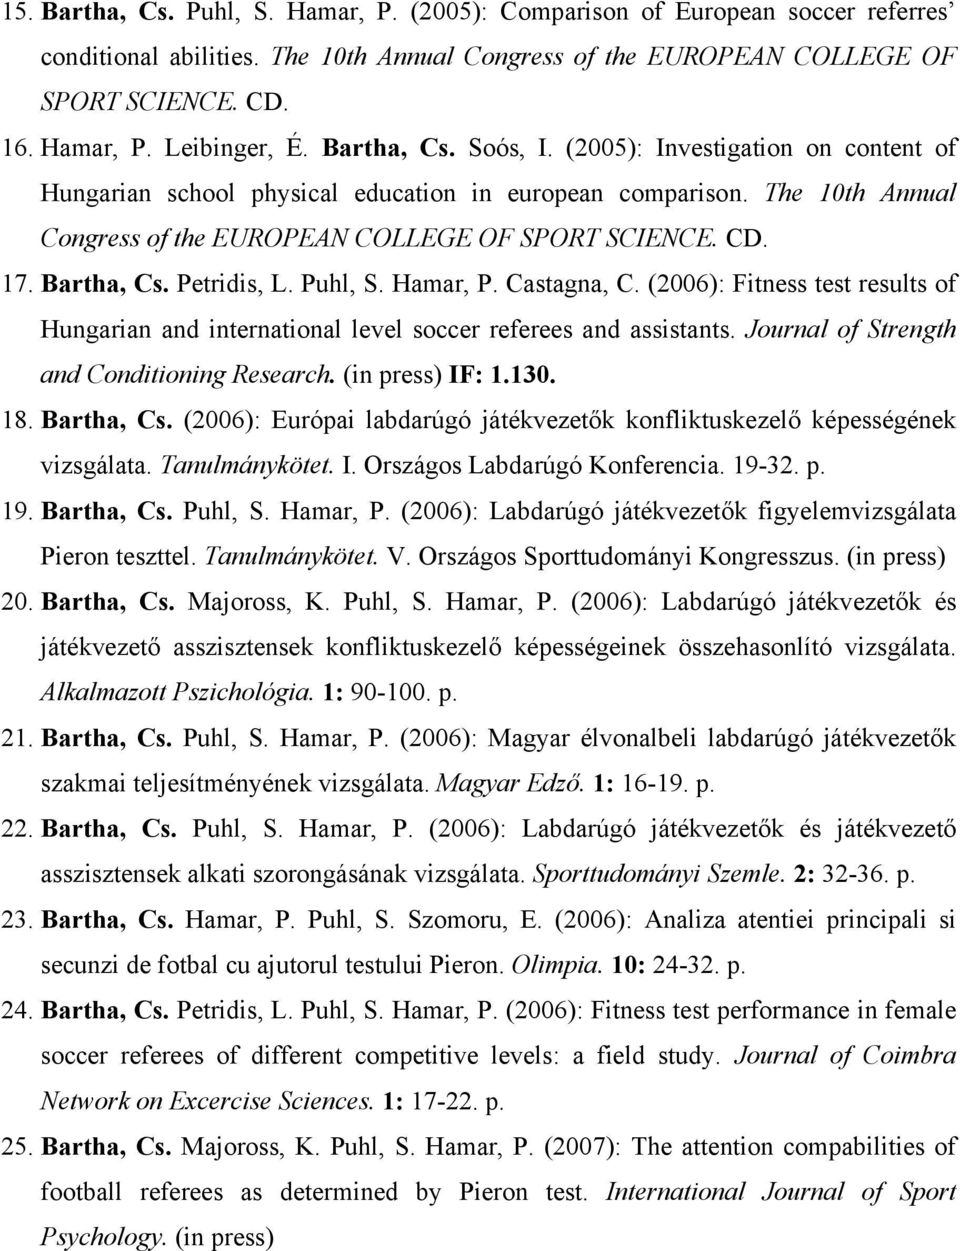 Bartha, Cs. Petridis, L. Puhl, S. Hamar, P. Castagna, C. (2006): Fitness test results of Hungarian and international level soccer referees and assistants.